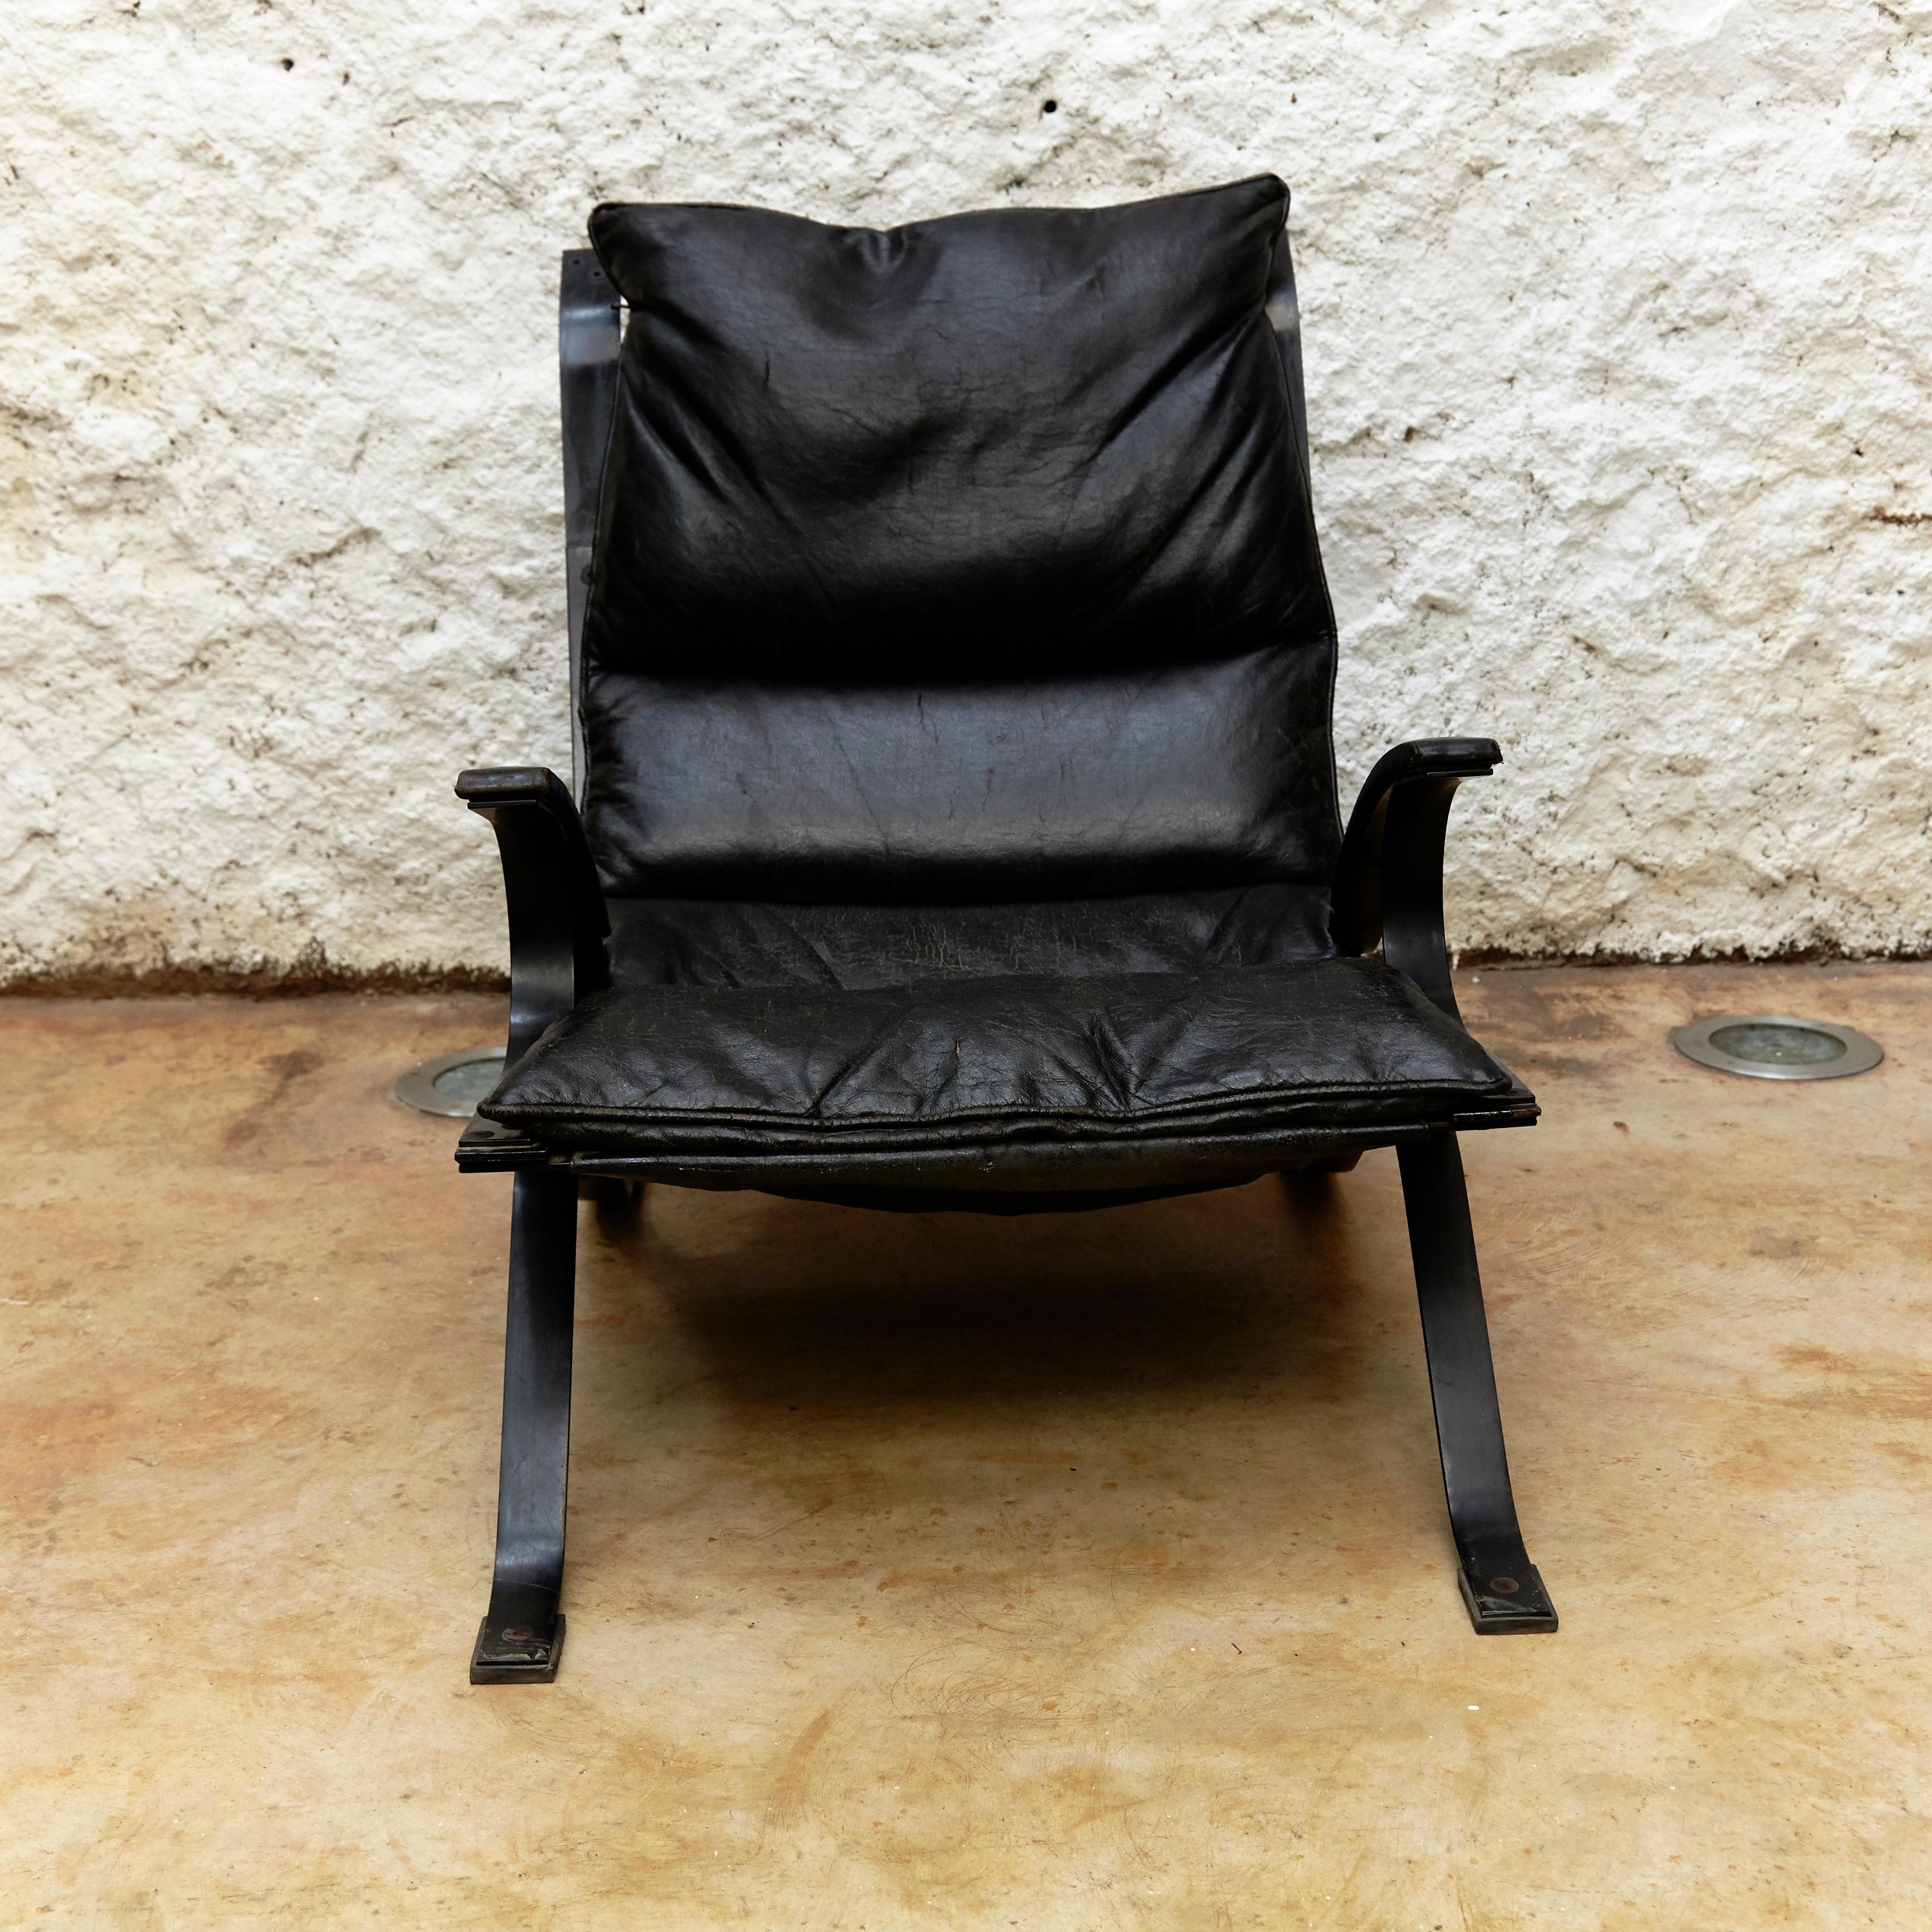 Lounge chair designed by Pep Bonet for Levesta manufactured in Spain, 1969.

Lacquered plated steel frame and original black leatherette.

In original condition, with minor wear consistent with age and use, preserving a beautiful patina. Some